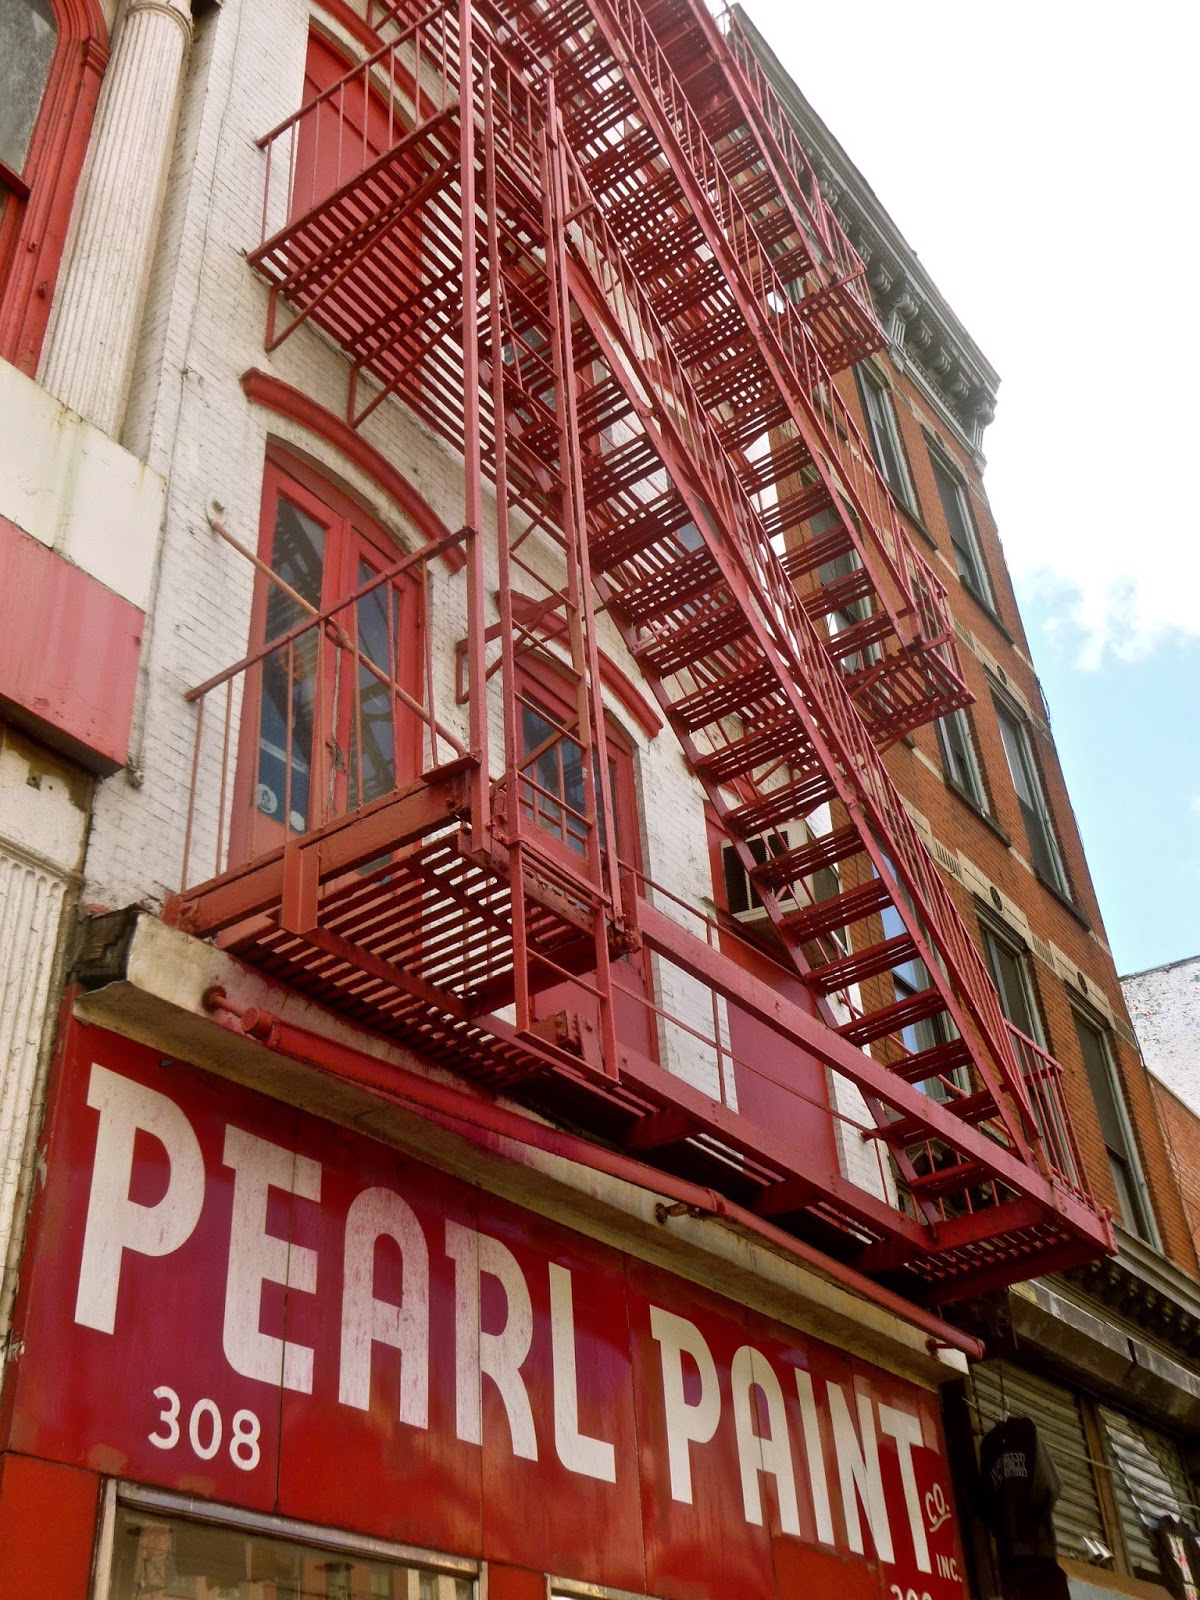 All Sales Final: The Last Days of Pearl Paint, a Tribeca Institution